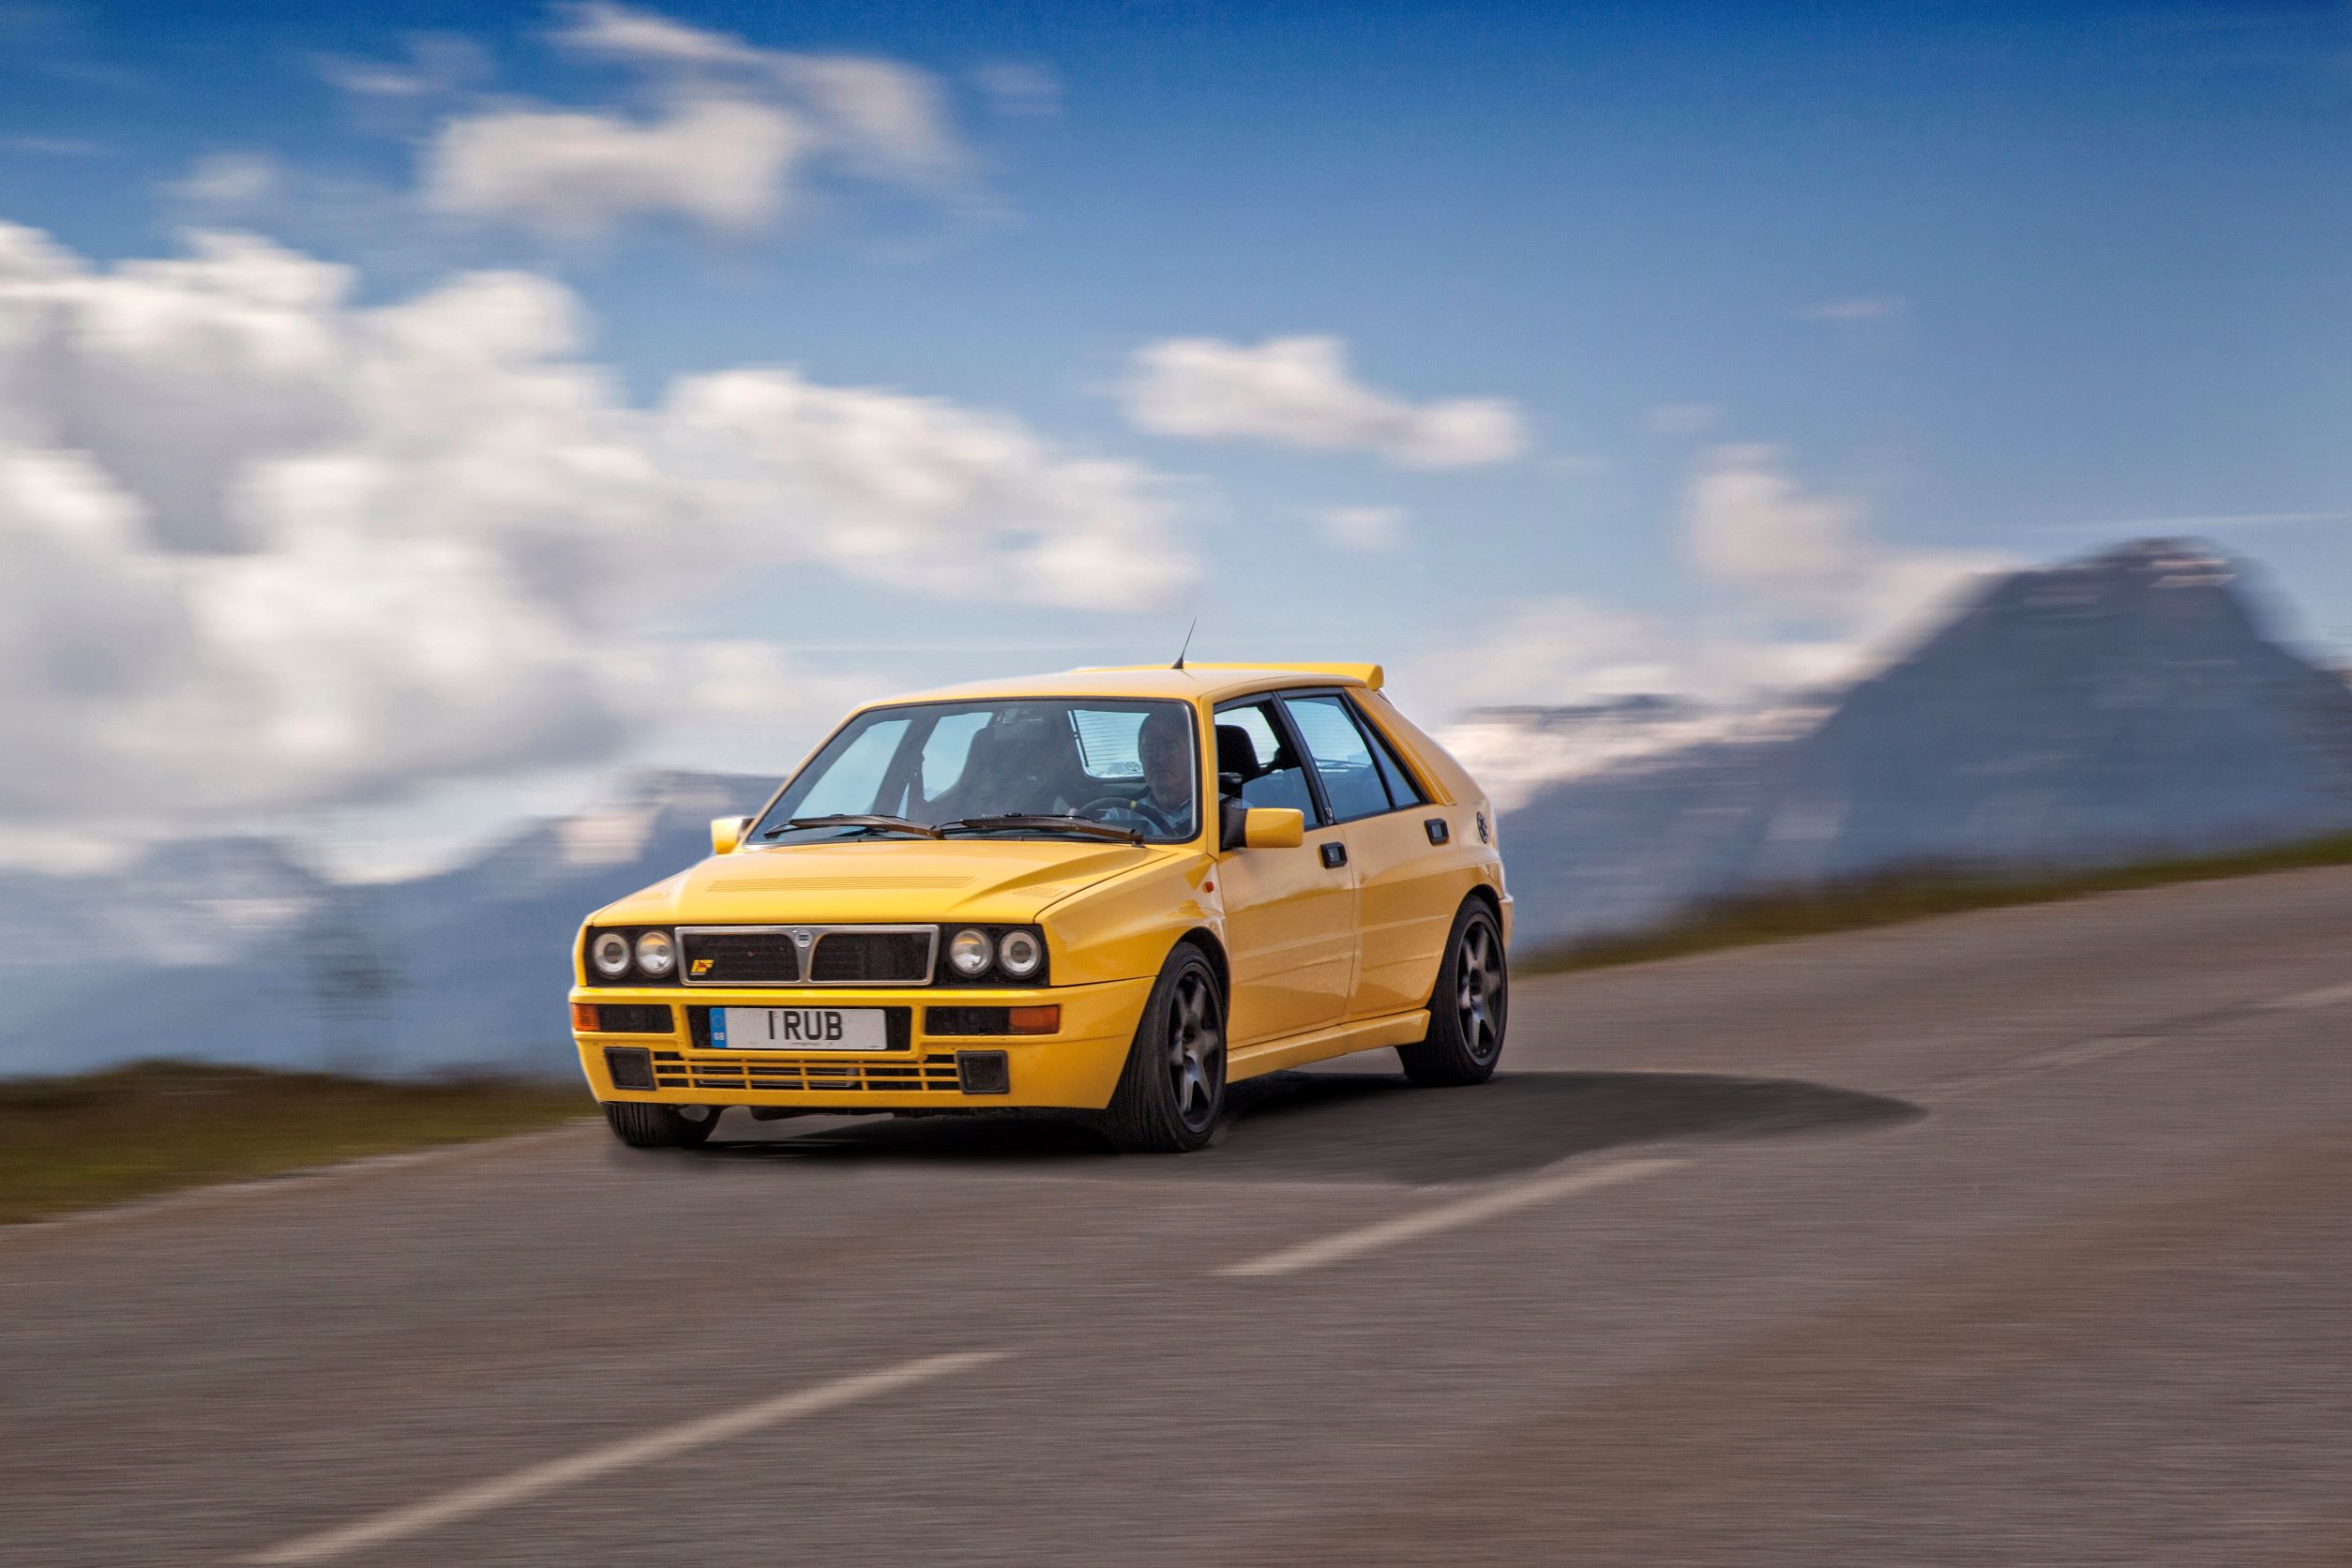 A yellow Lancia Delta Integrale drives through the French Alps